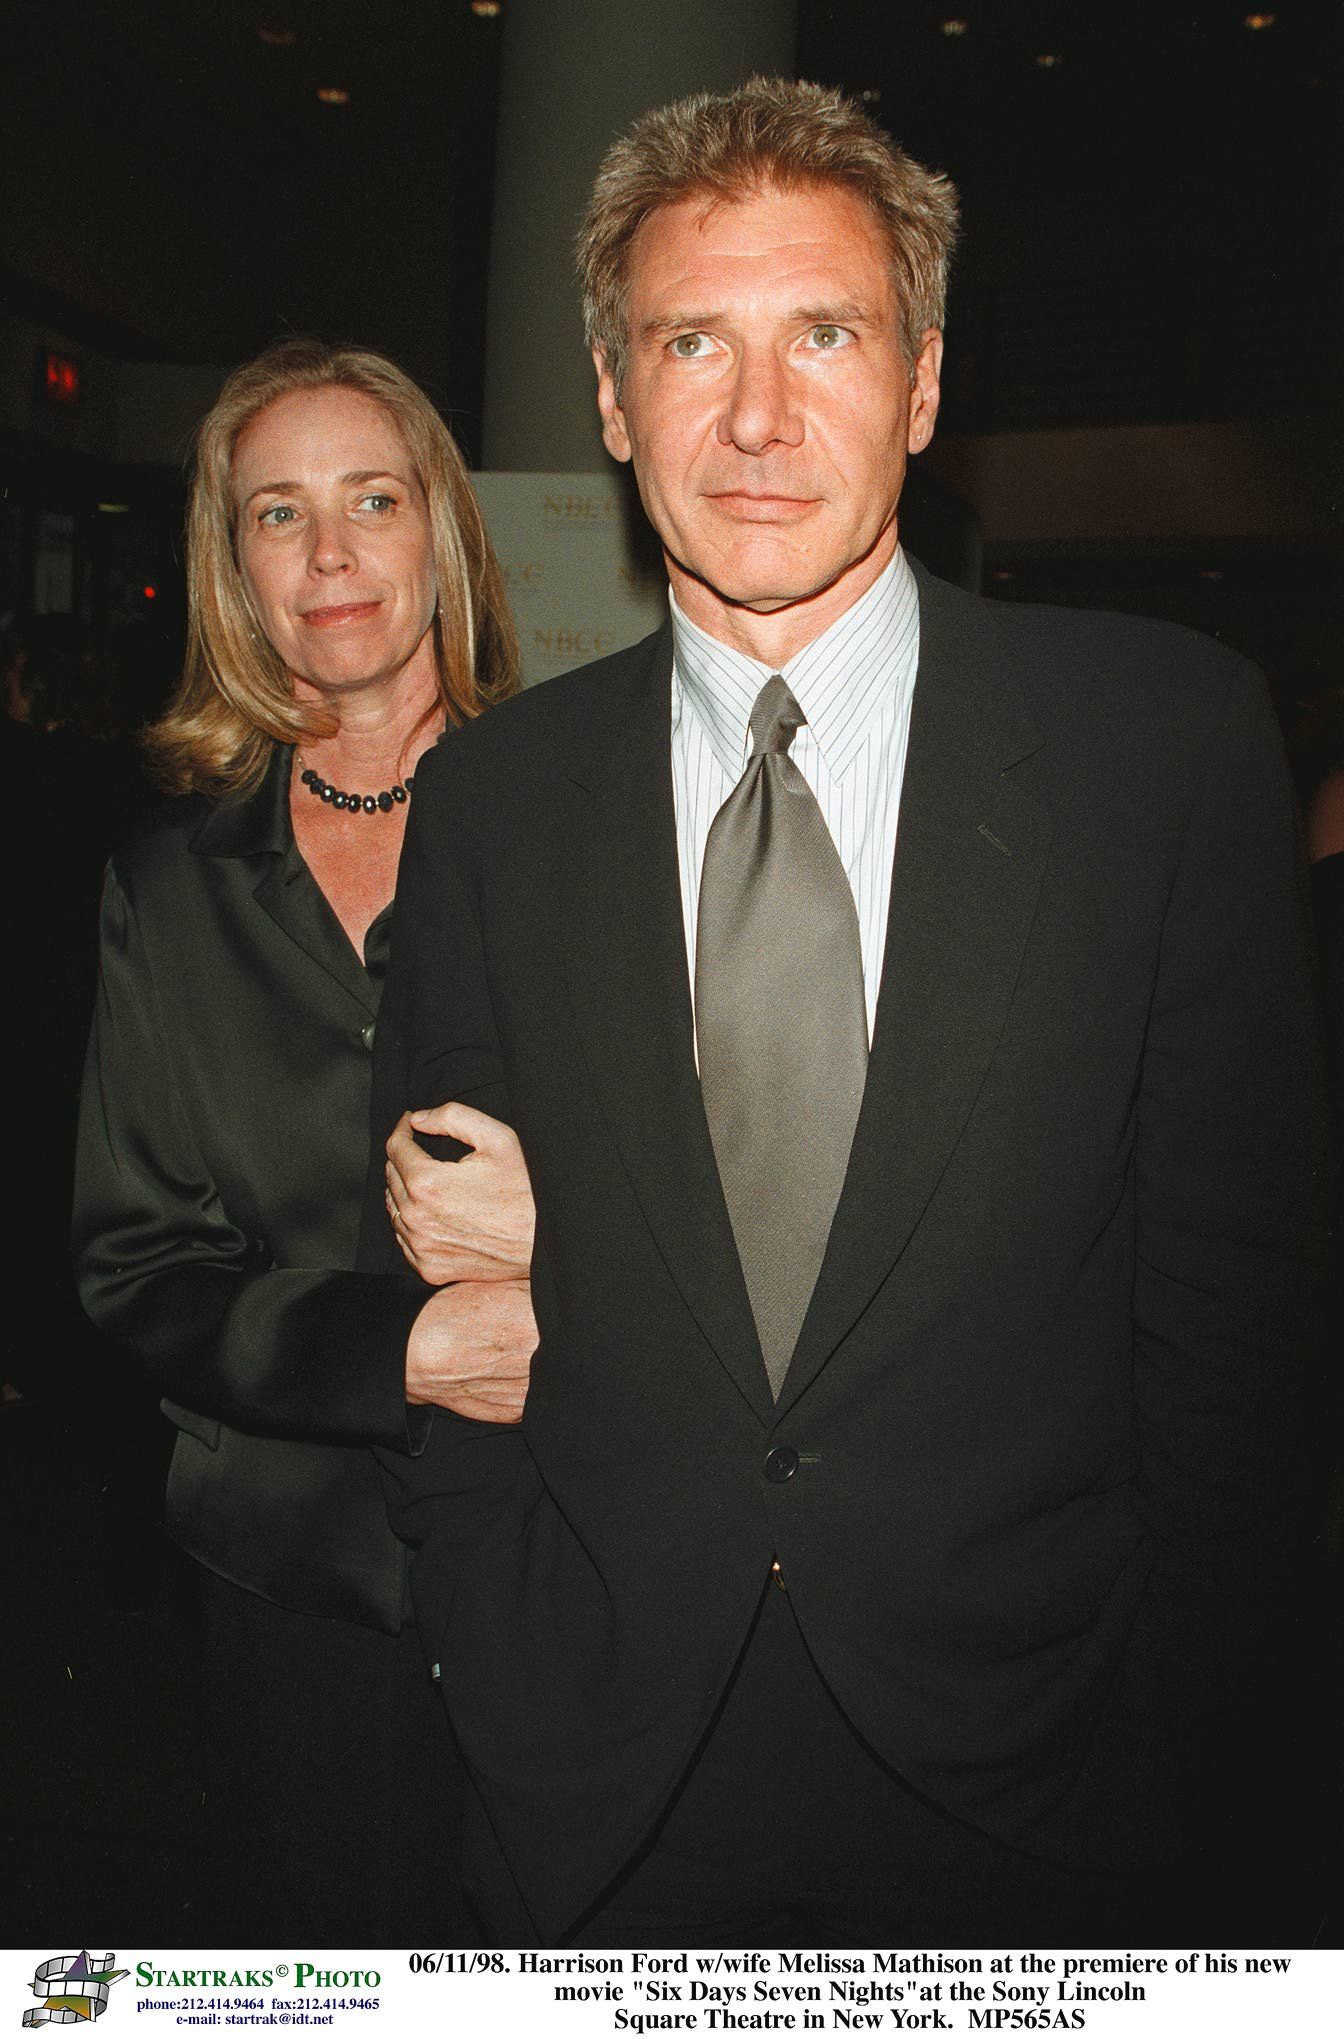 Who is Harrison Ford's ex-wife Melissa Mathison?